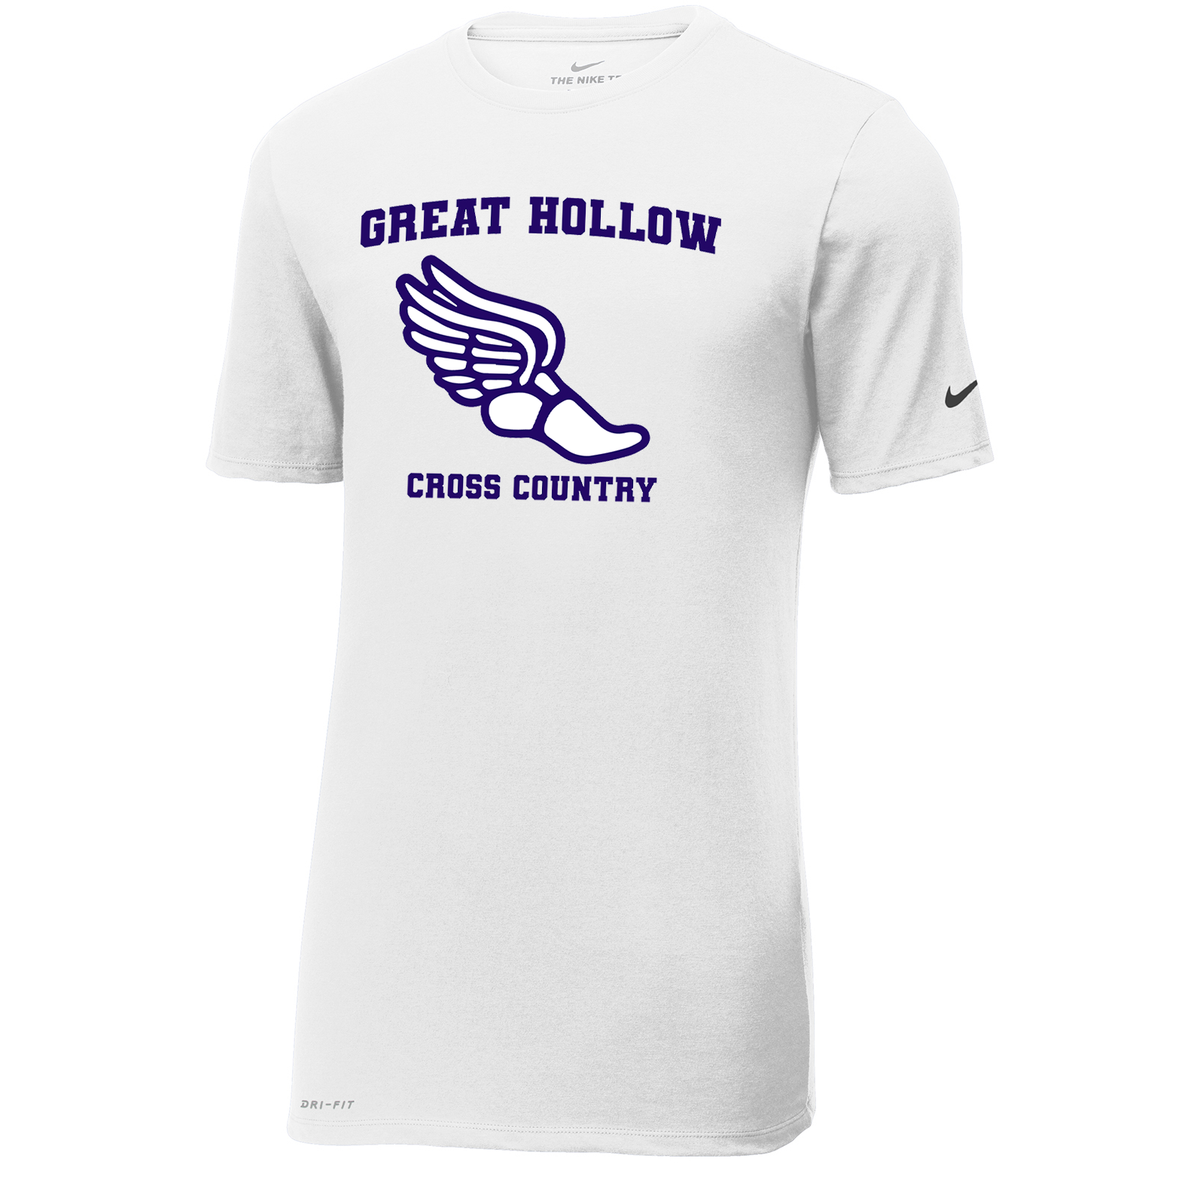 Great Hollow Cross Country Nike Dri-FIT Tee